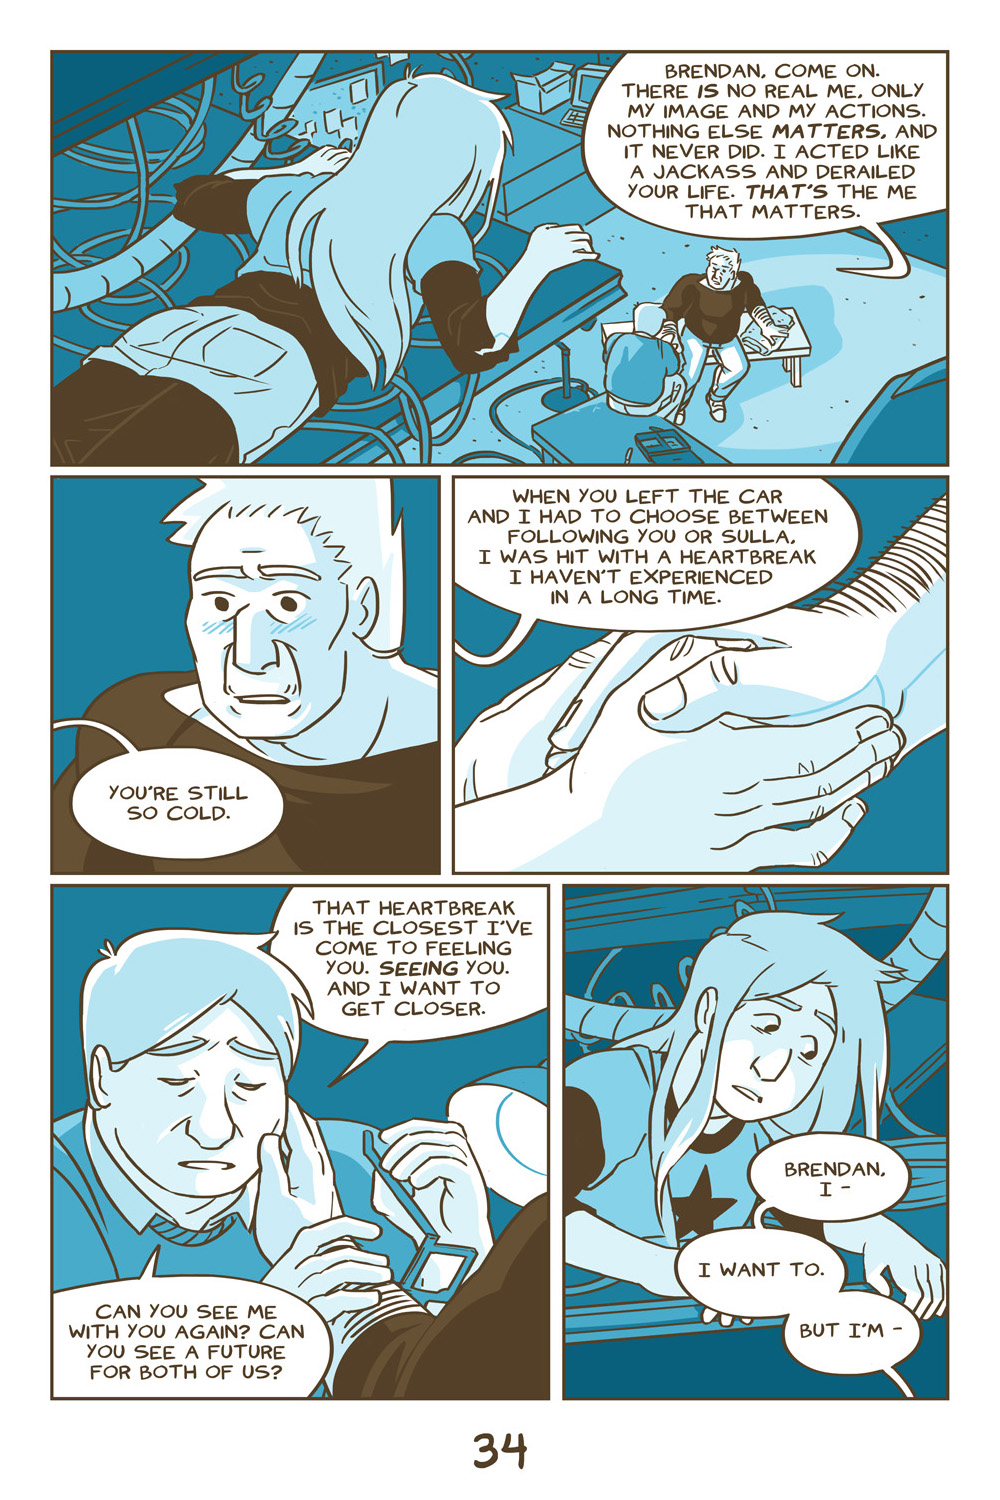 Chapter 7, Page 34